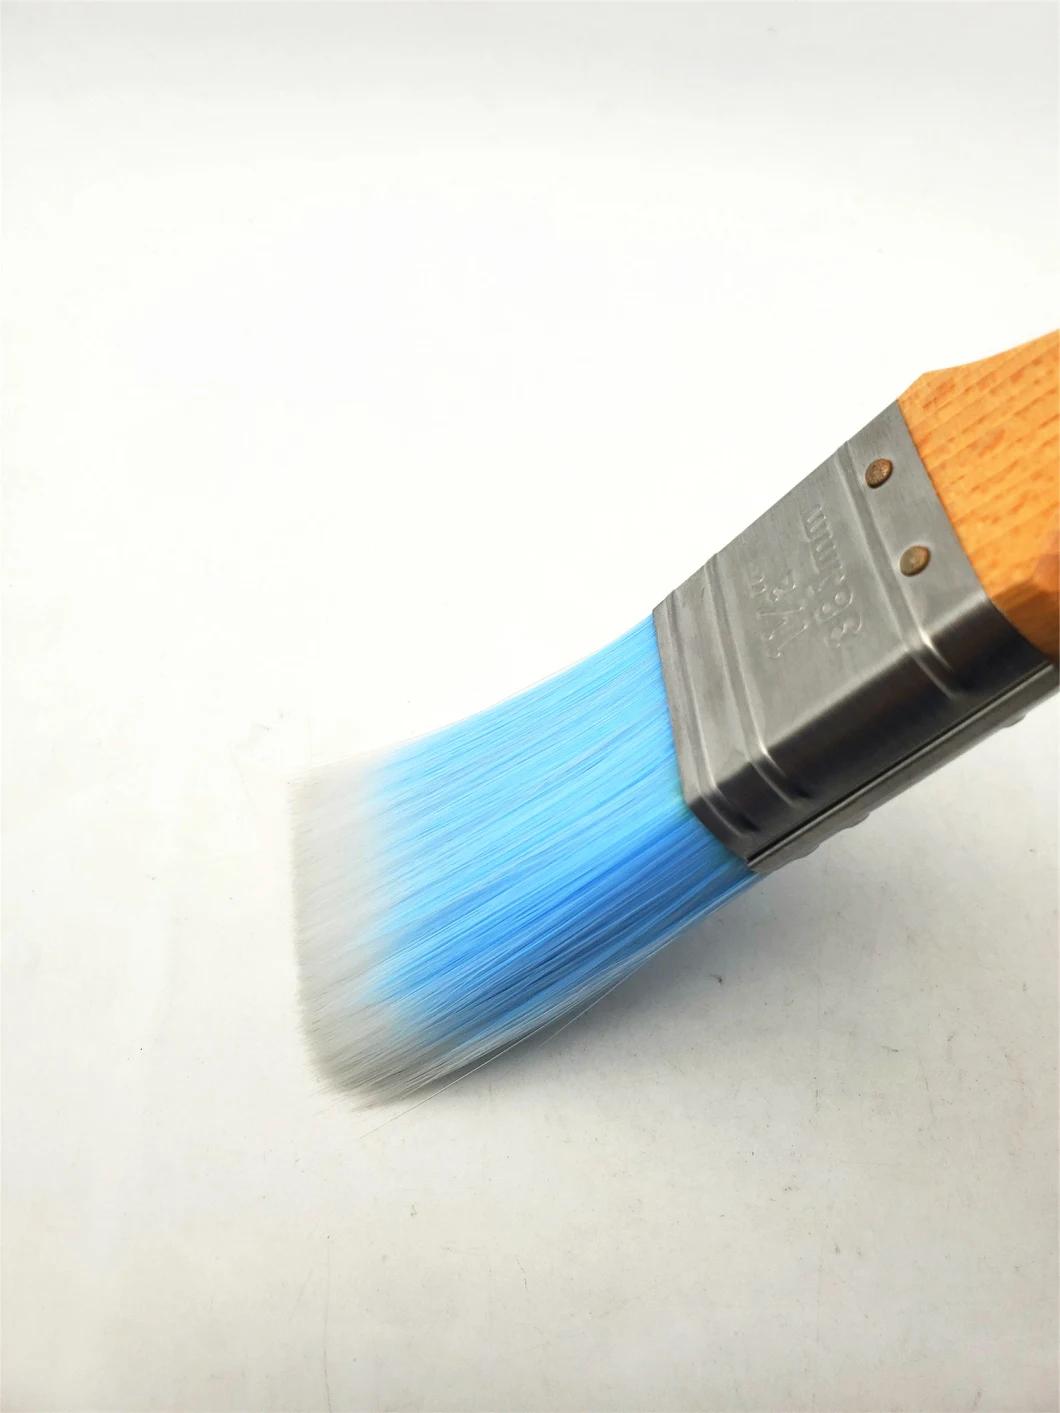 High Quality Factory Price Paint Brush with Wooden Handle